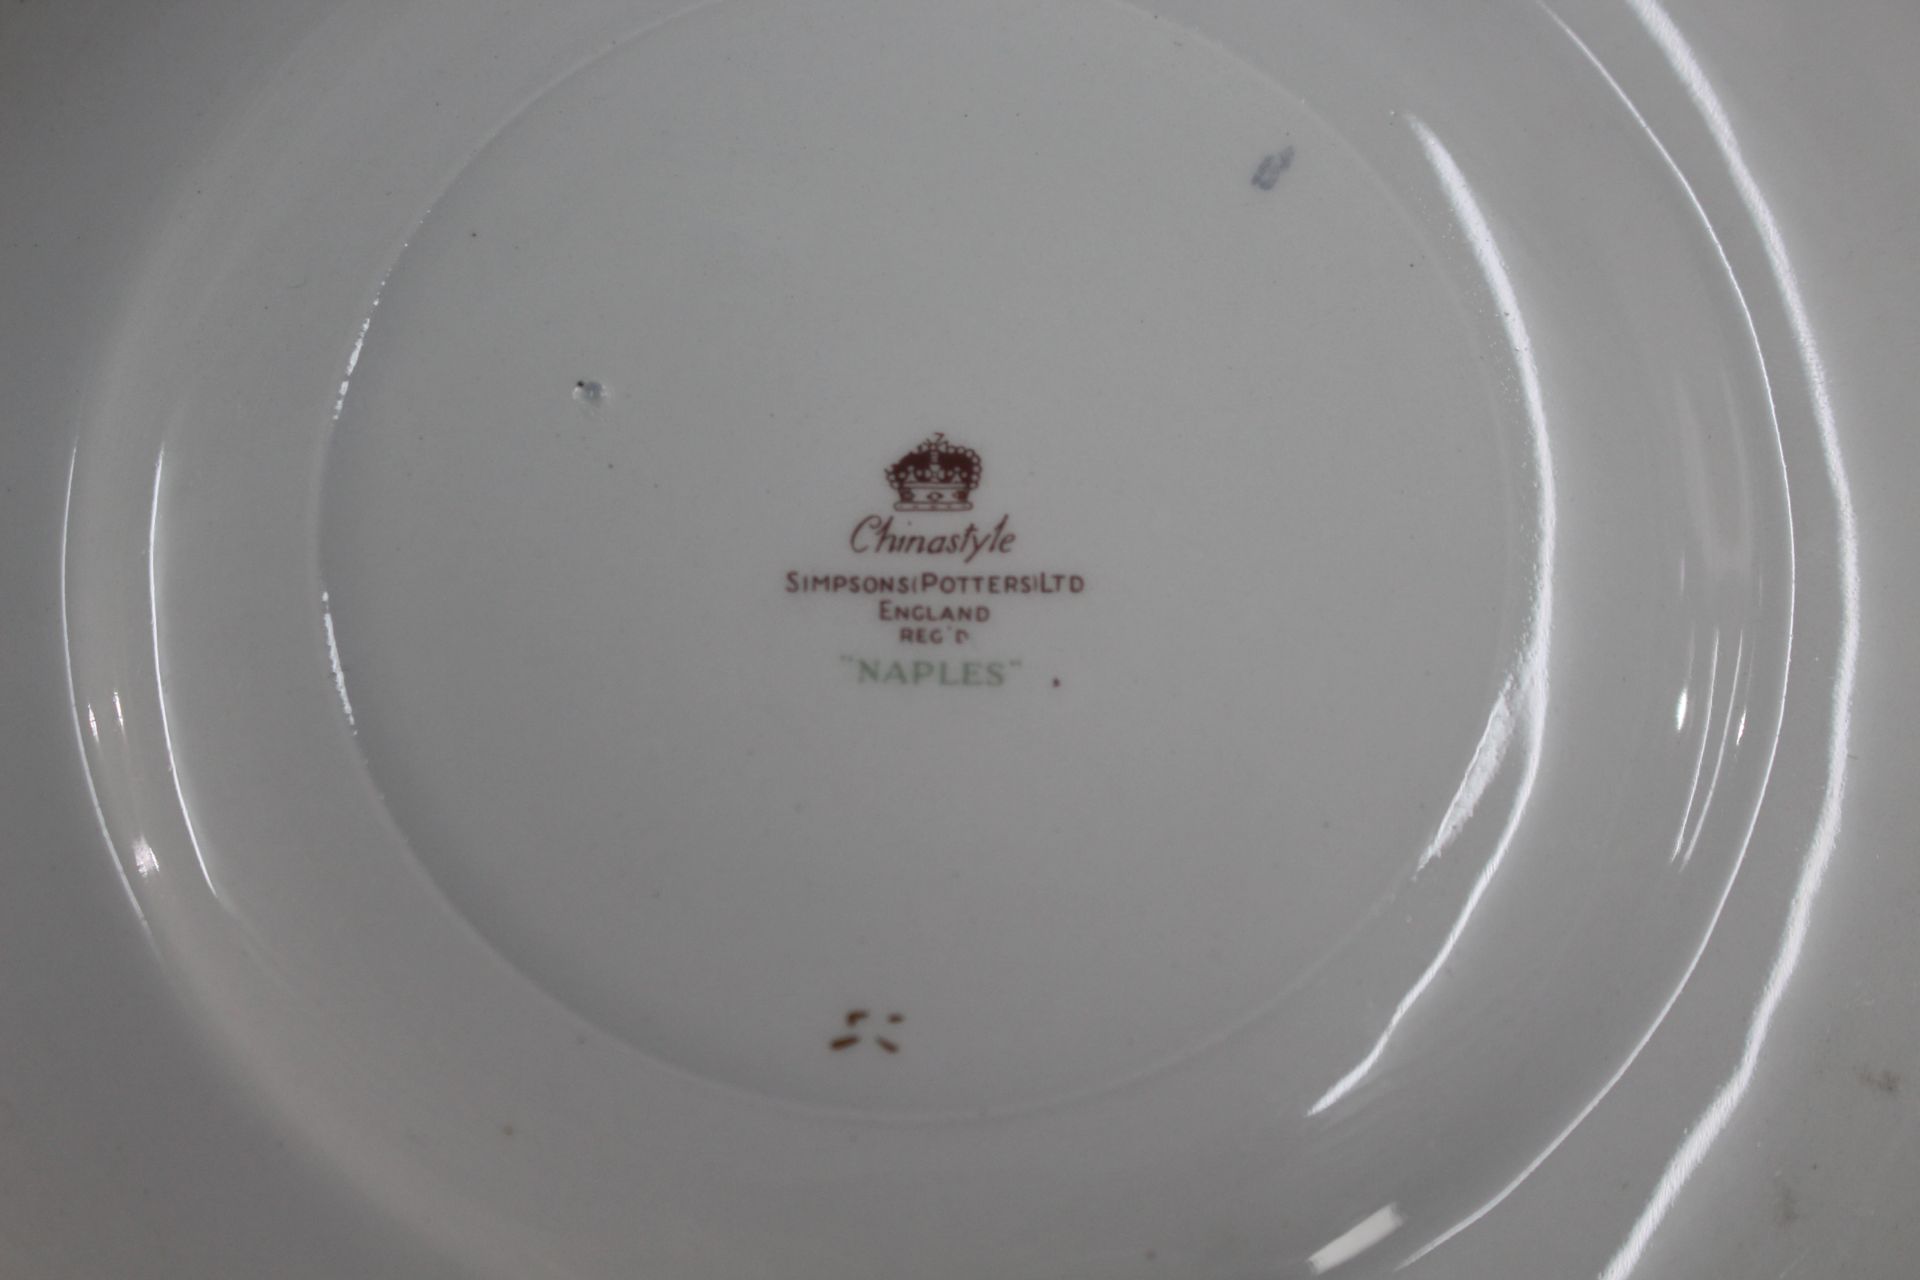 China style Simpson Potteries Naples Part Dinner Service - Image 7 of 7